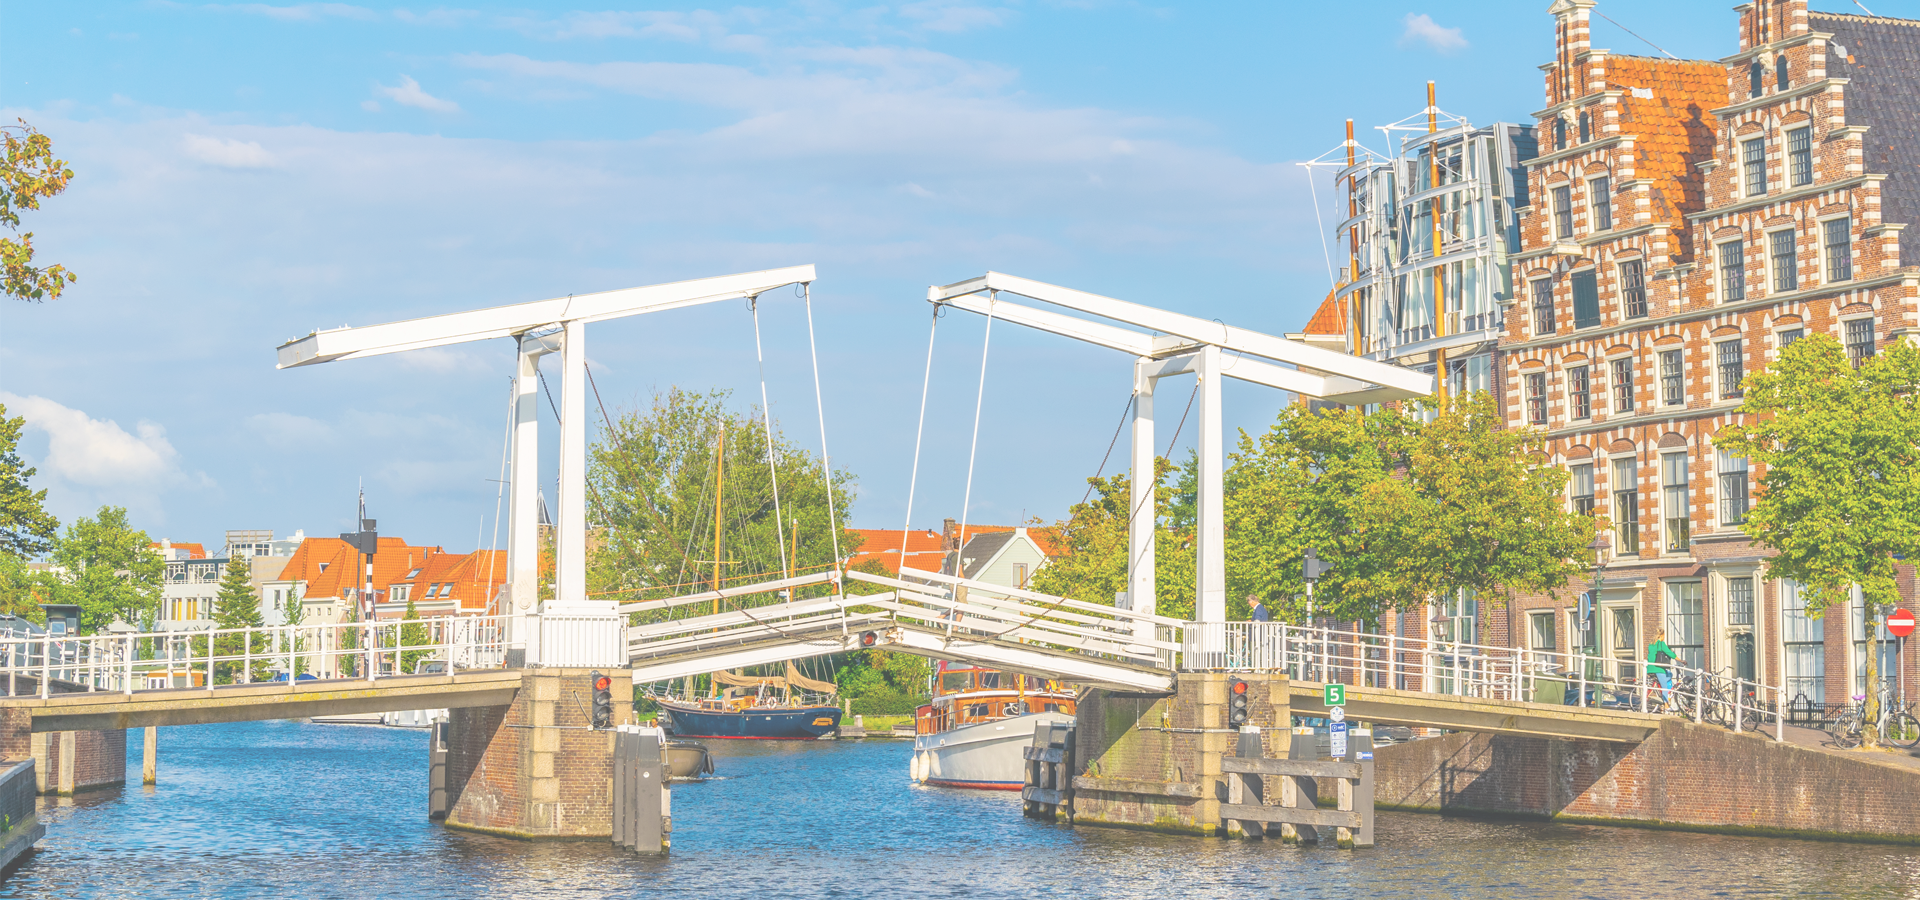 The  SME Market in The Netherlands